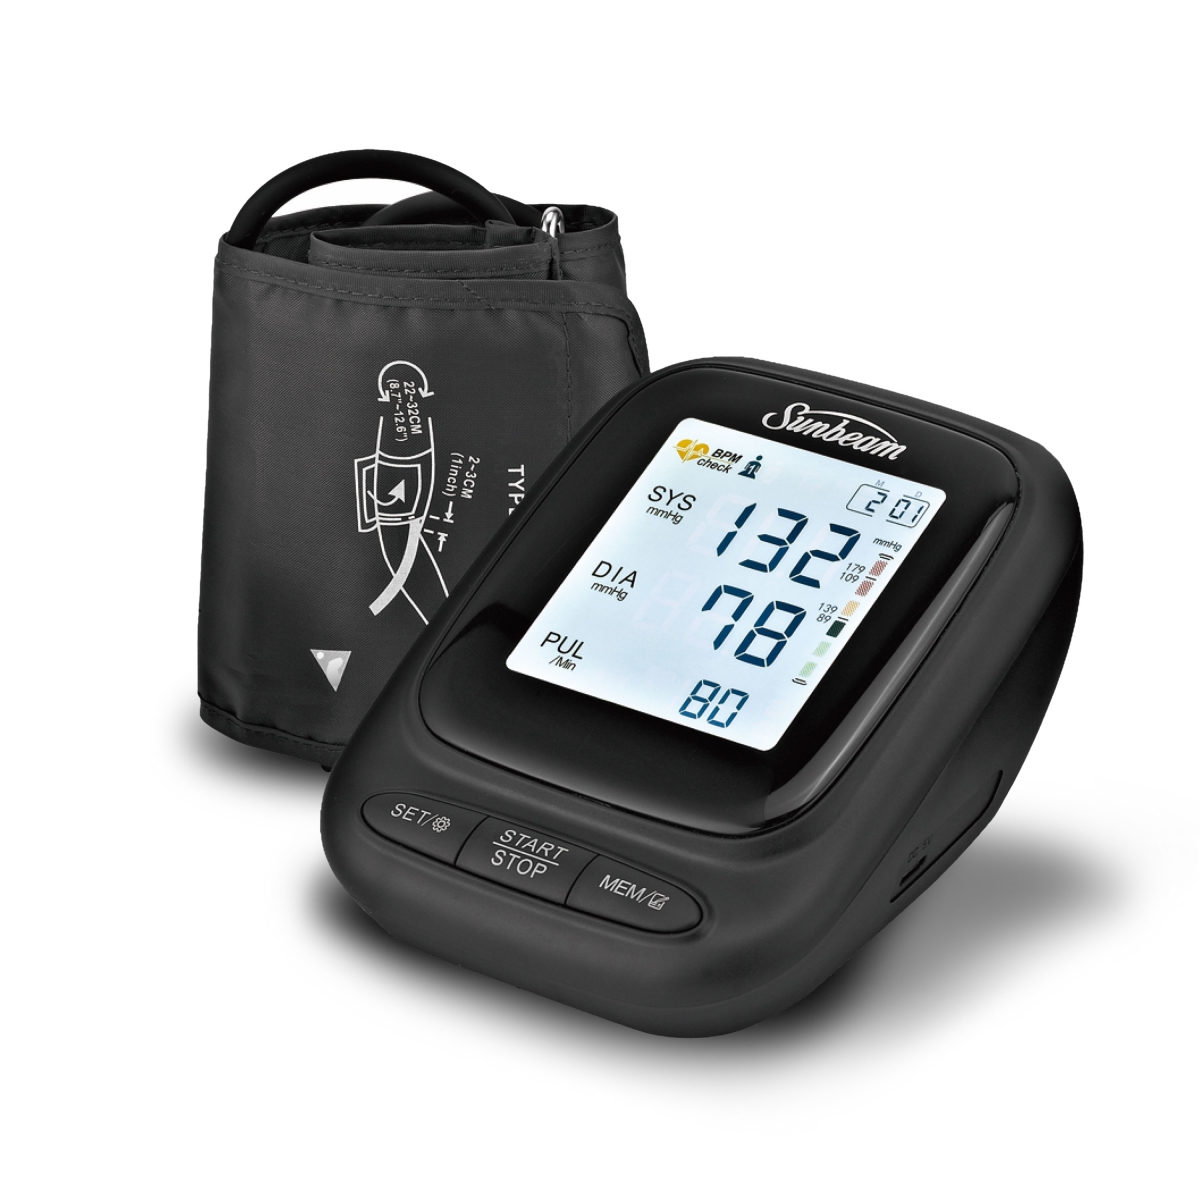 Picture of Sunbeam 16984 Upper Arm Blood Pressure Monitor with Voice Broadcast Technology with Batteries